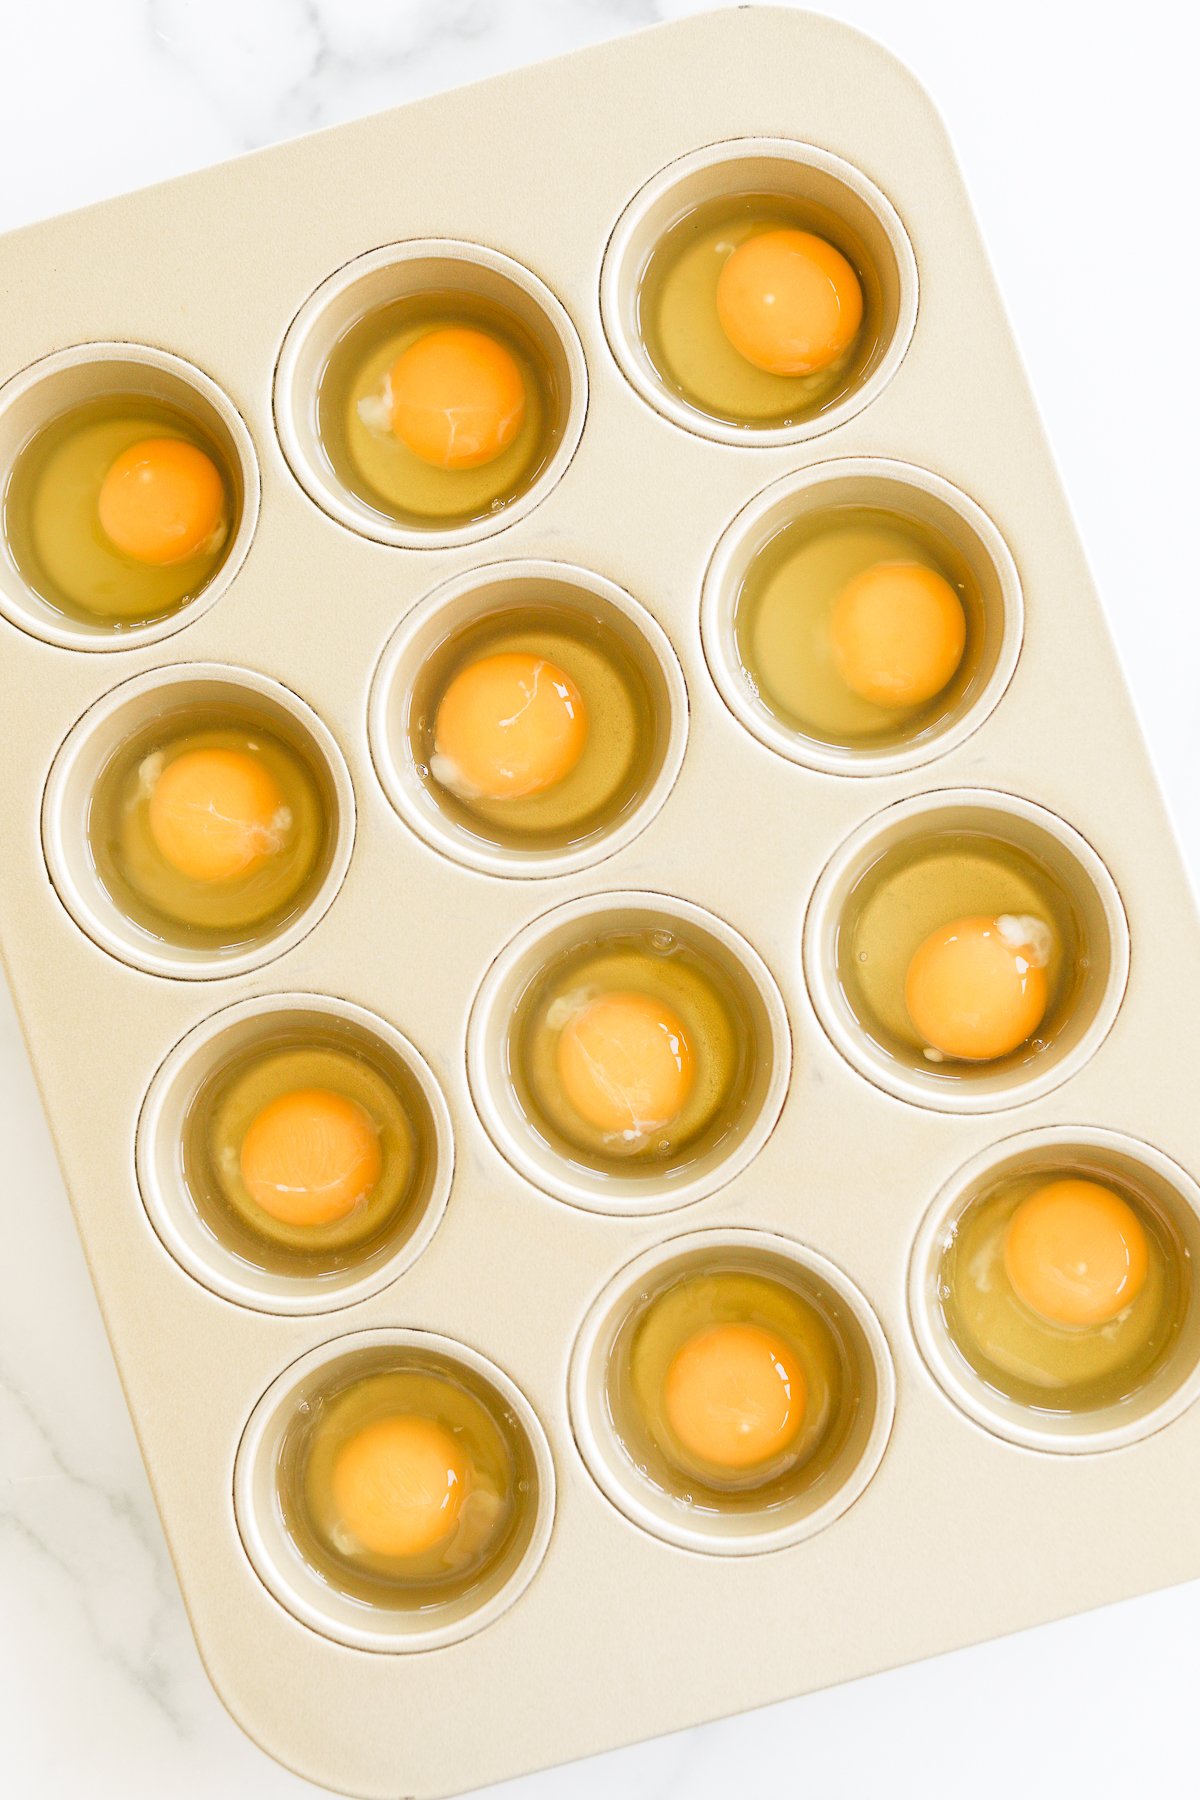 A dozen raw eggs cracked into a muffin tin, ready for baking or cooking.